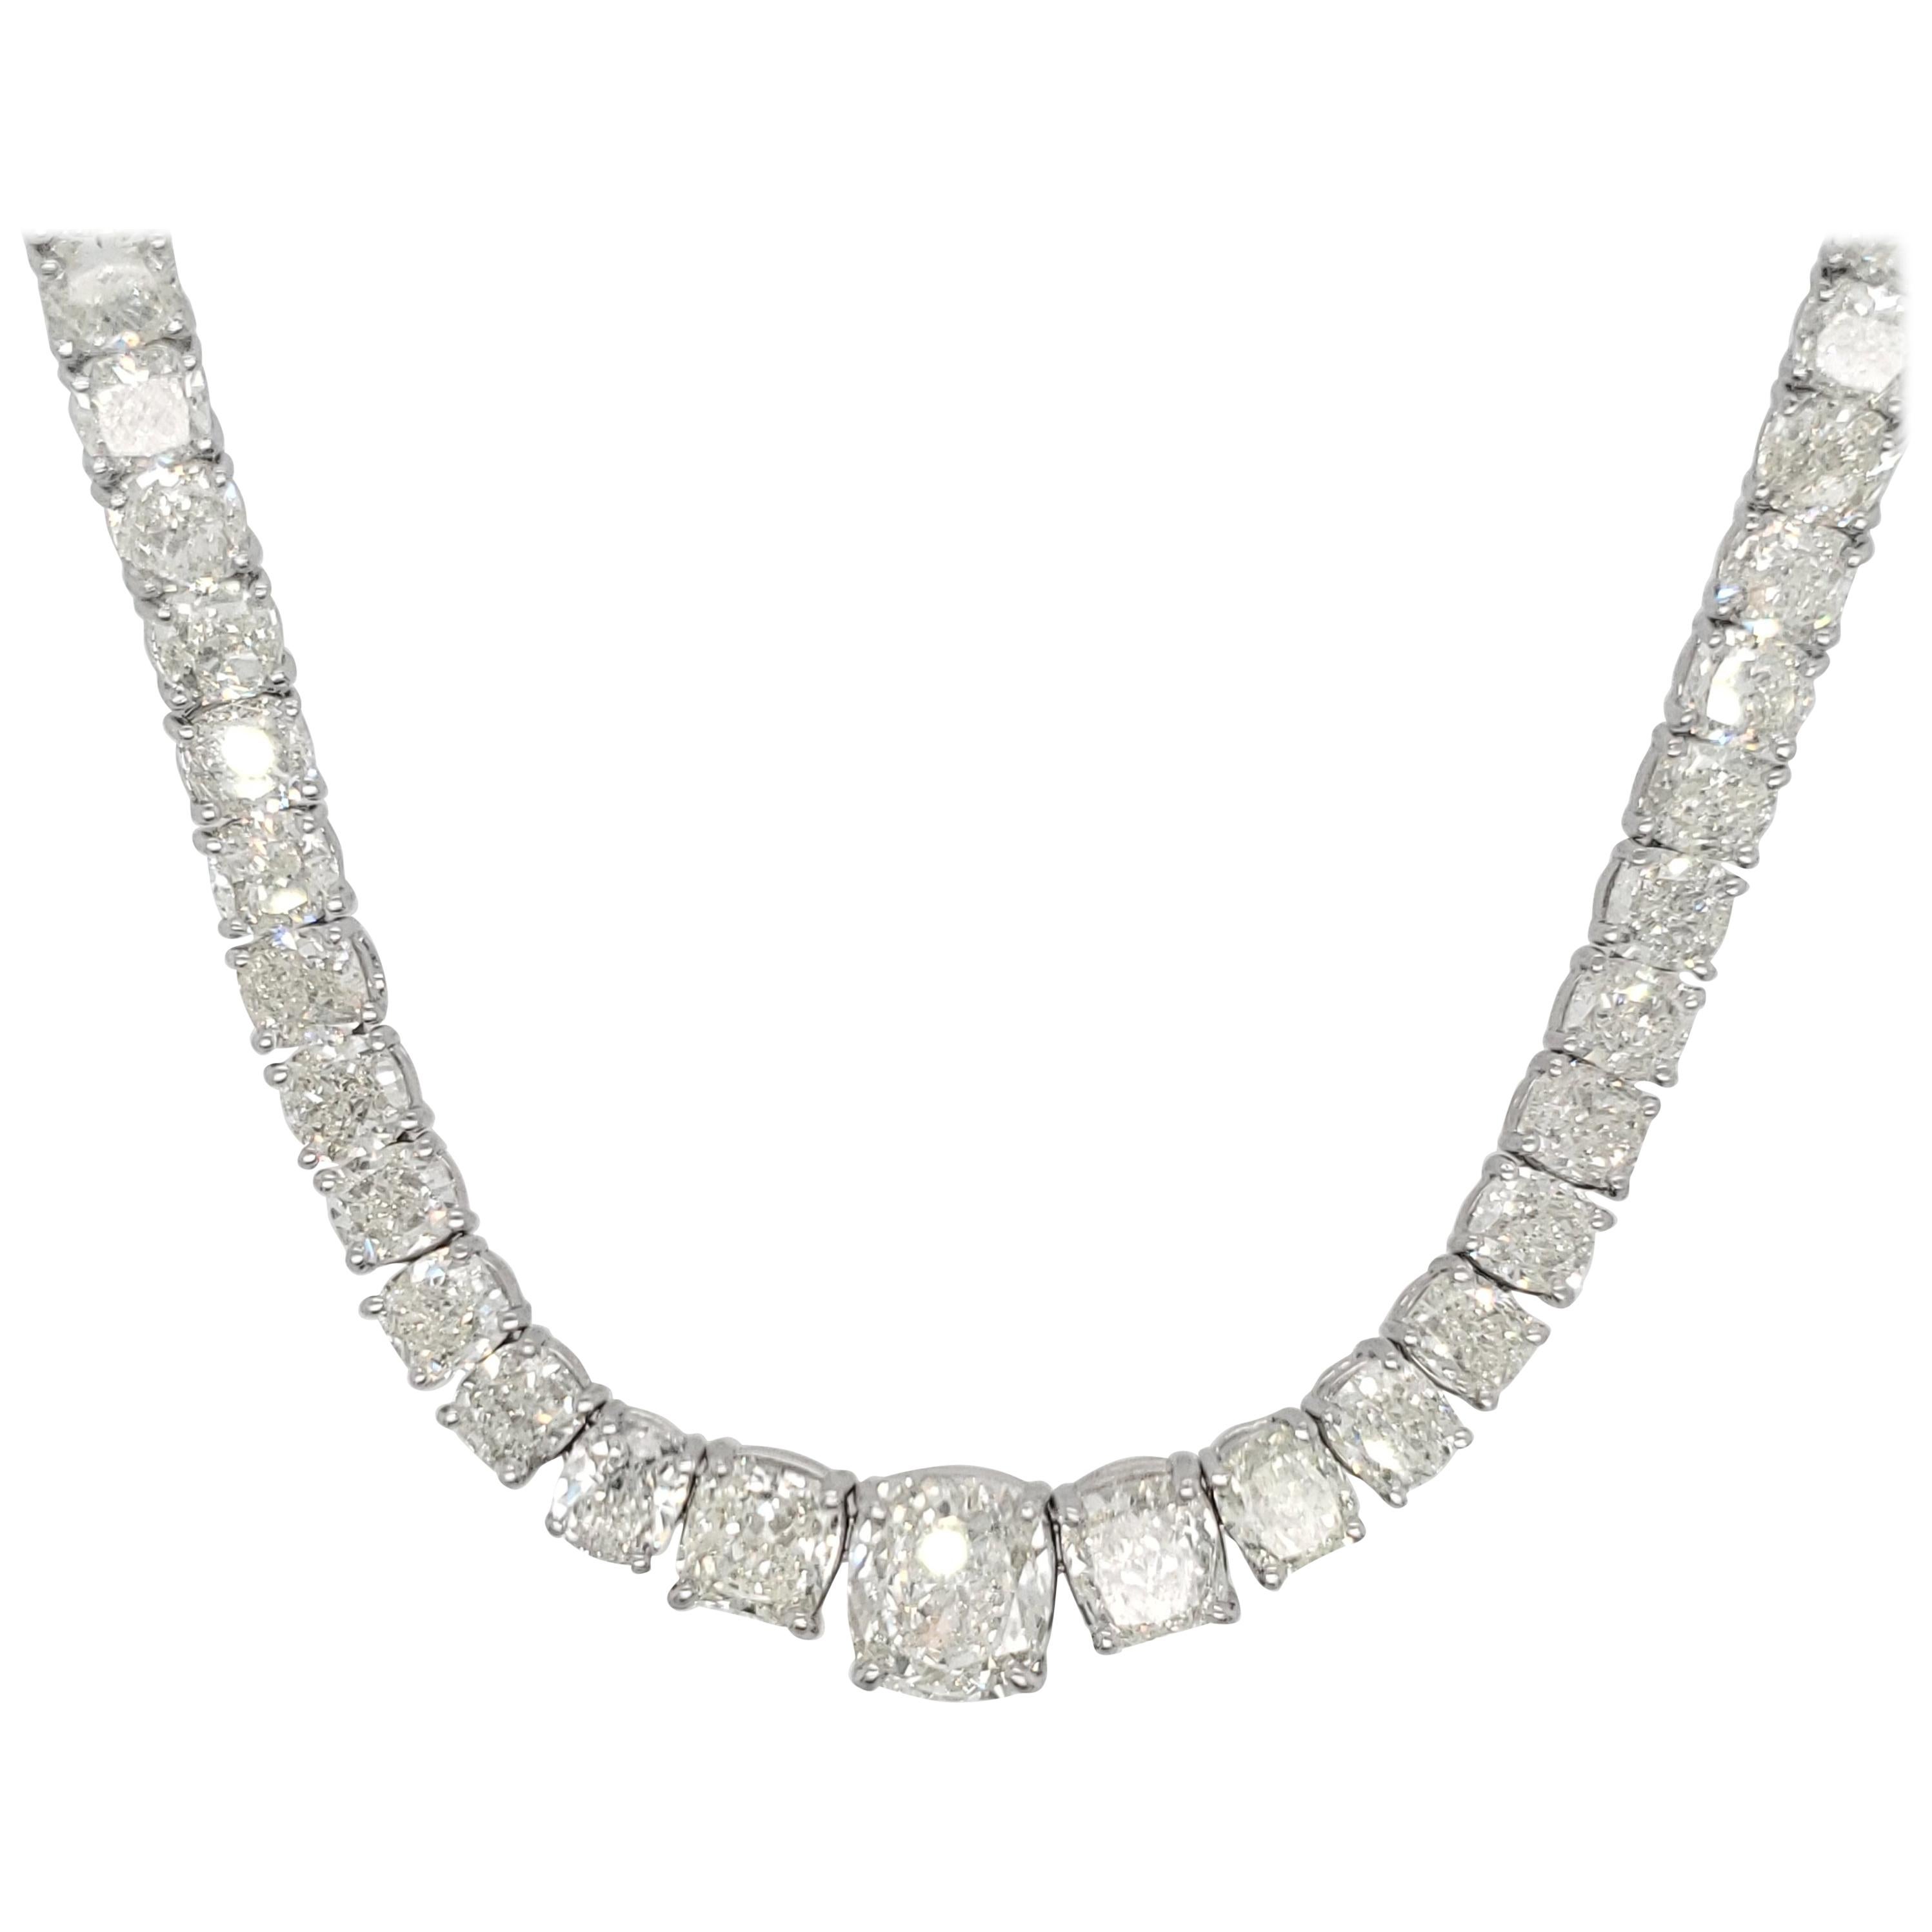 Cushion Cut Diamond Riviera Necklace with 72.46 Carat Total